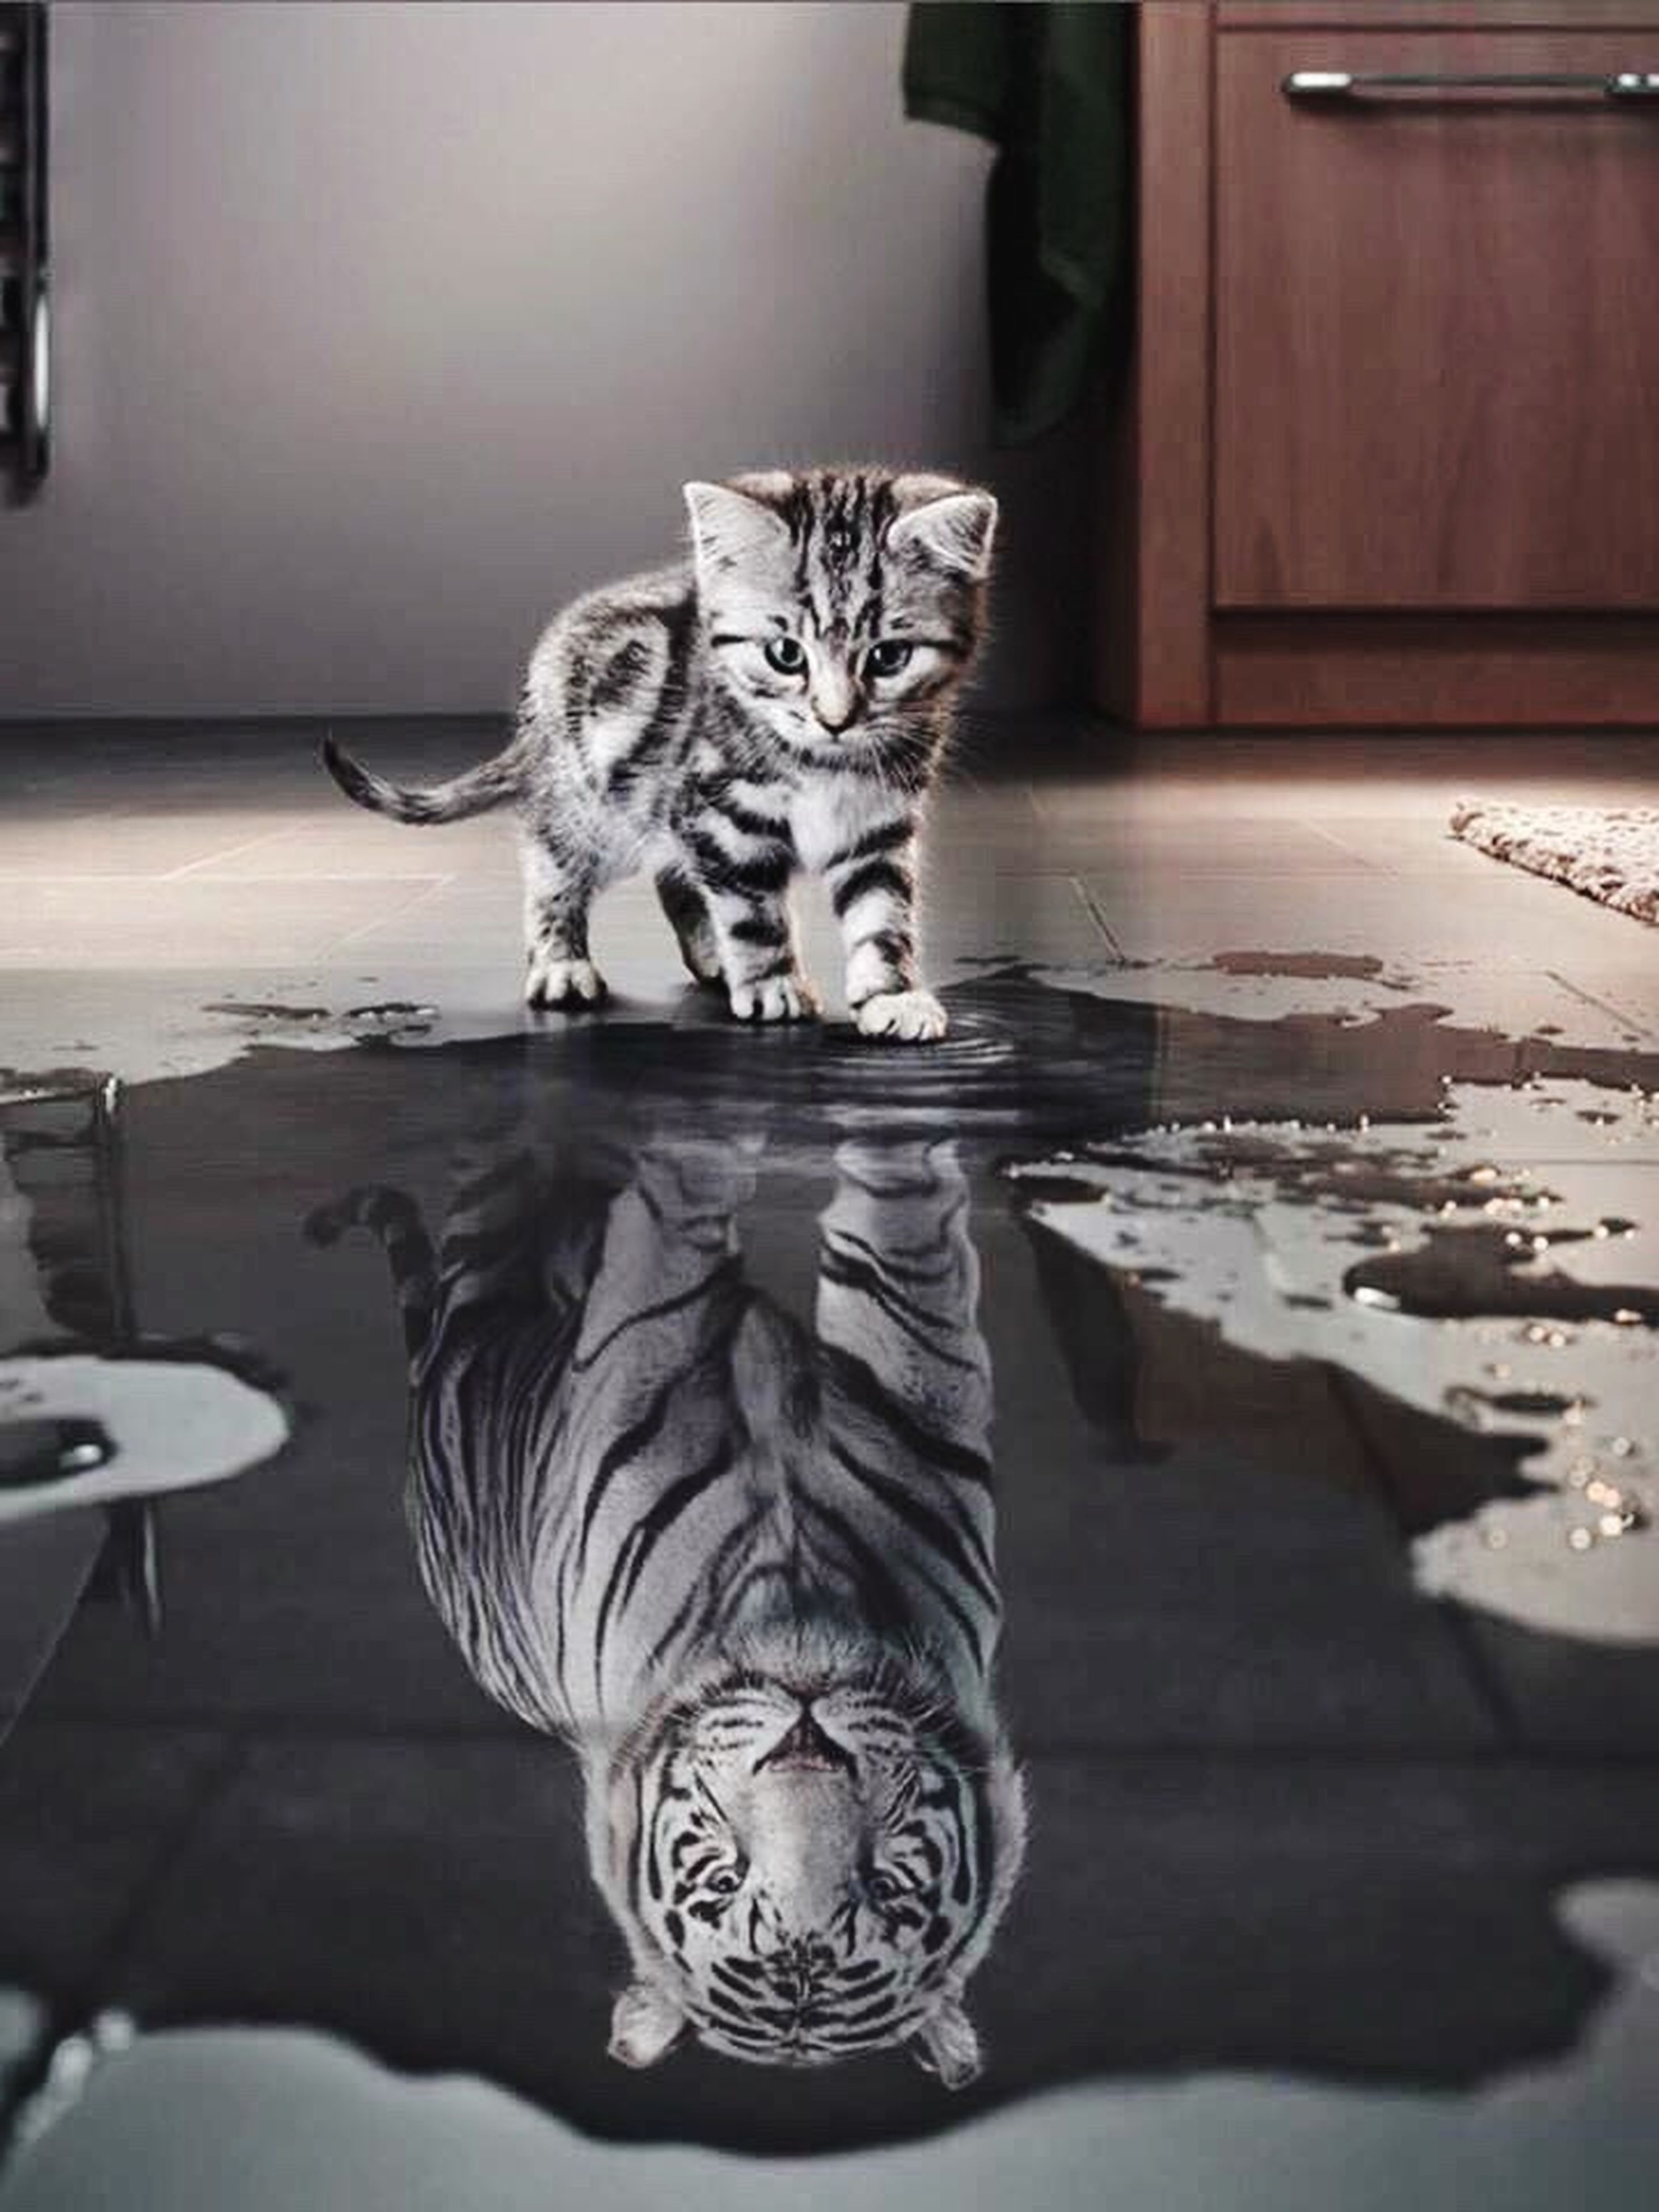 cool random pics - matter most is how you see yourself